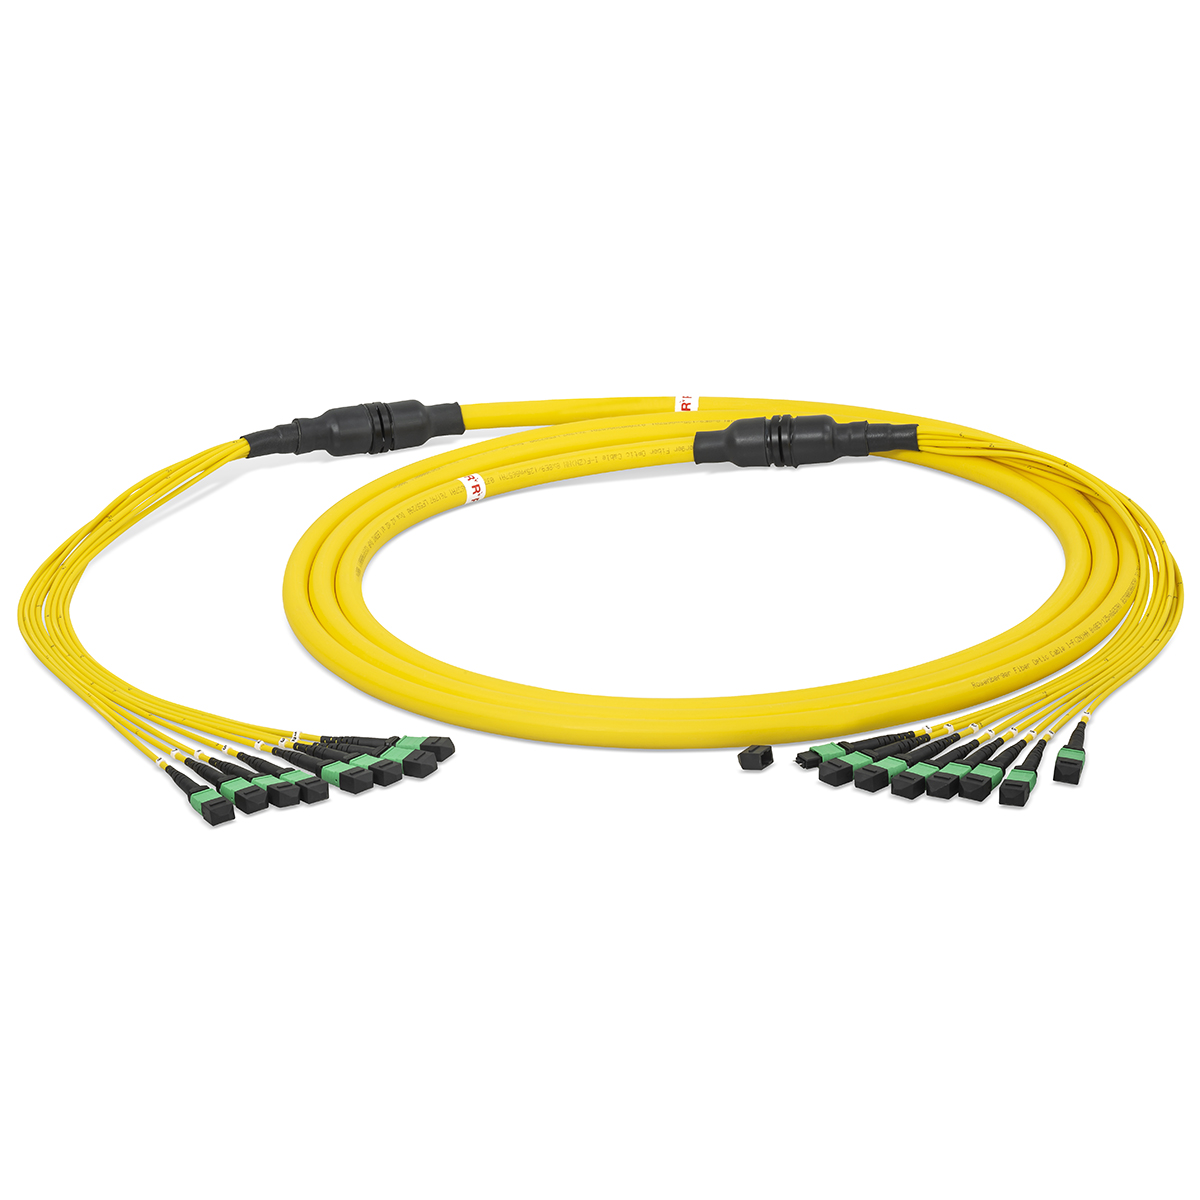 Fiber optic trunk cable breakout 64 fibers singlemode OS2, MTP®-OCTO-PC-m/ MTP®-OCTO-PC-m, I-F(ZN)HH